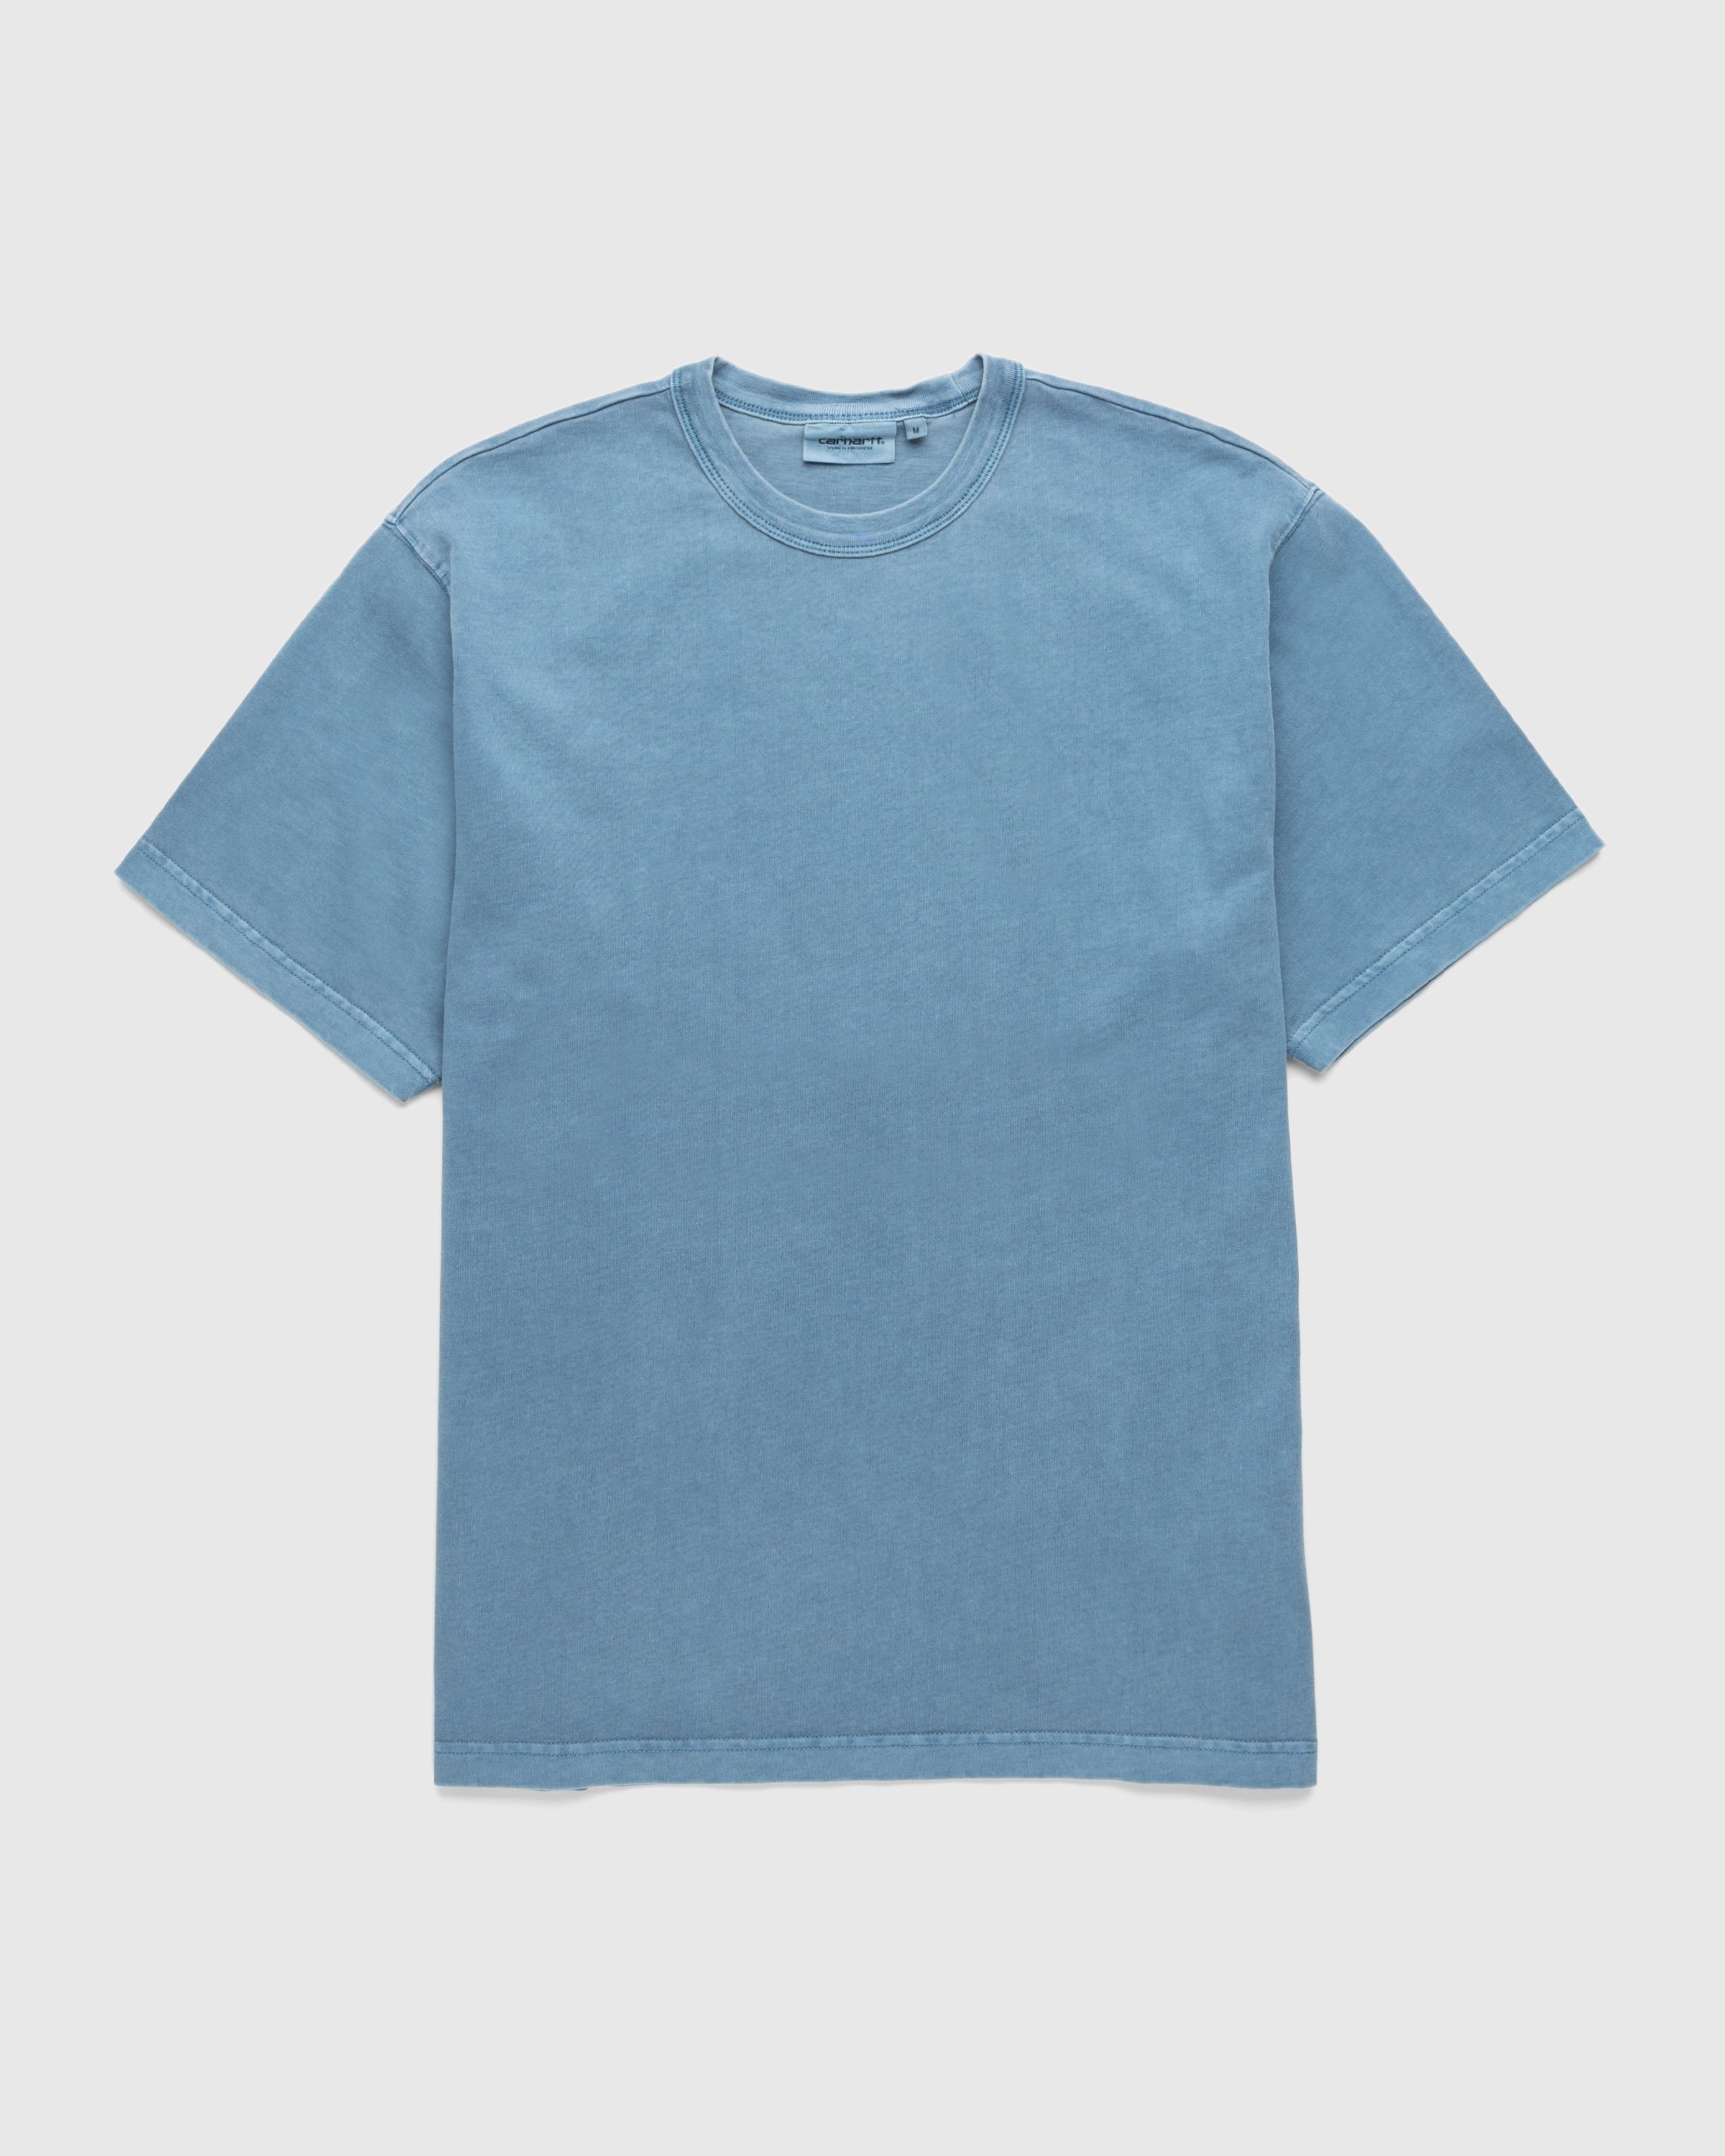 Carhartt WIP - S/S Taos T-Shirt Vancouver Blue/Garment-Dyed - Clothing - Blue - Image 1